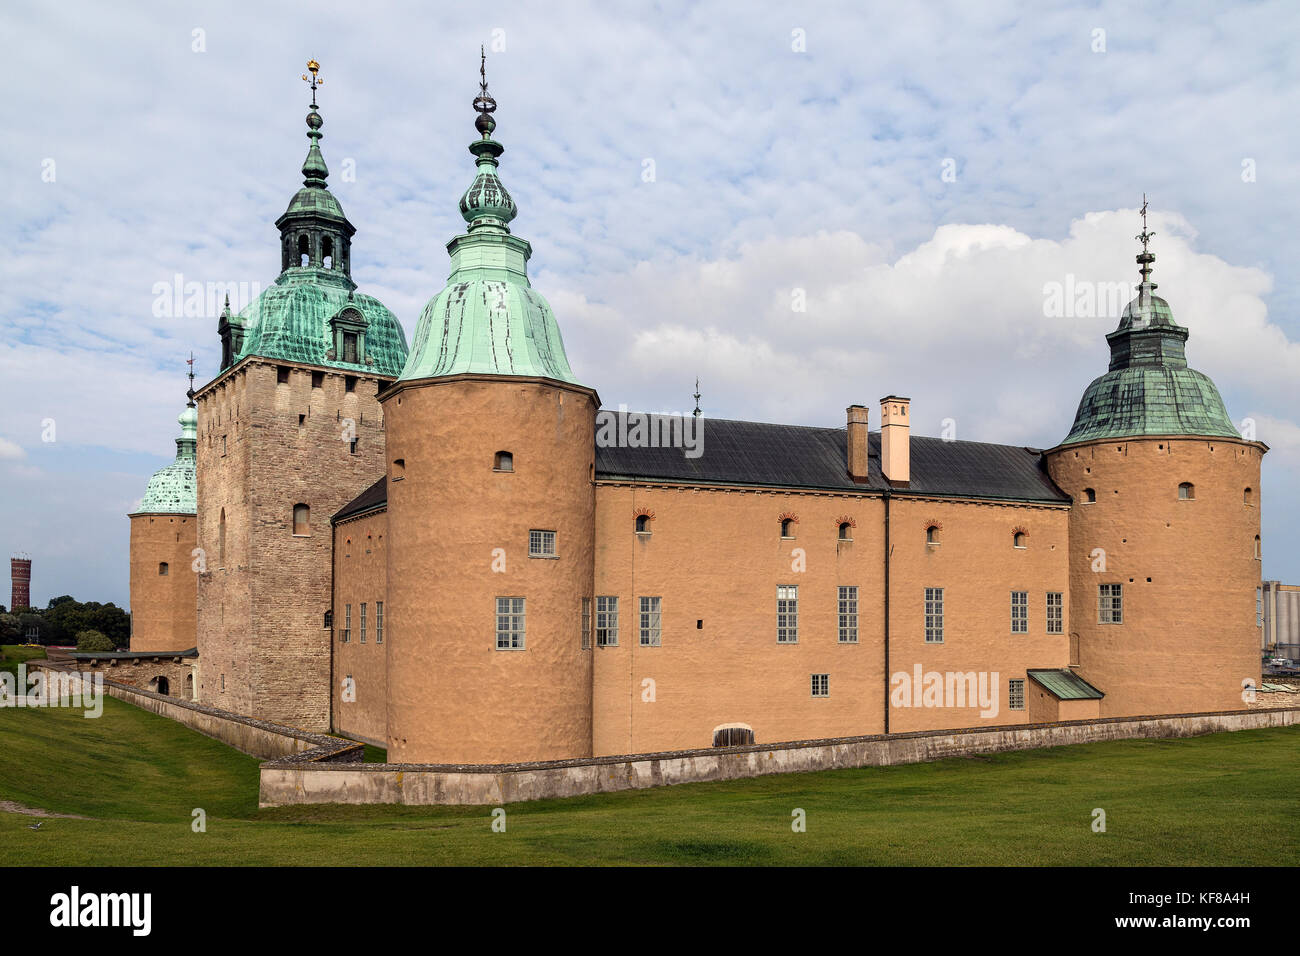 Kalmar Castle or Kalmar Slott - a castle in the city of Kalmar in the province of Smaland in Sweden. Parts of the castle date from the 12th century. Stock Photo